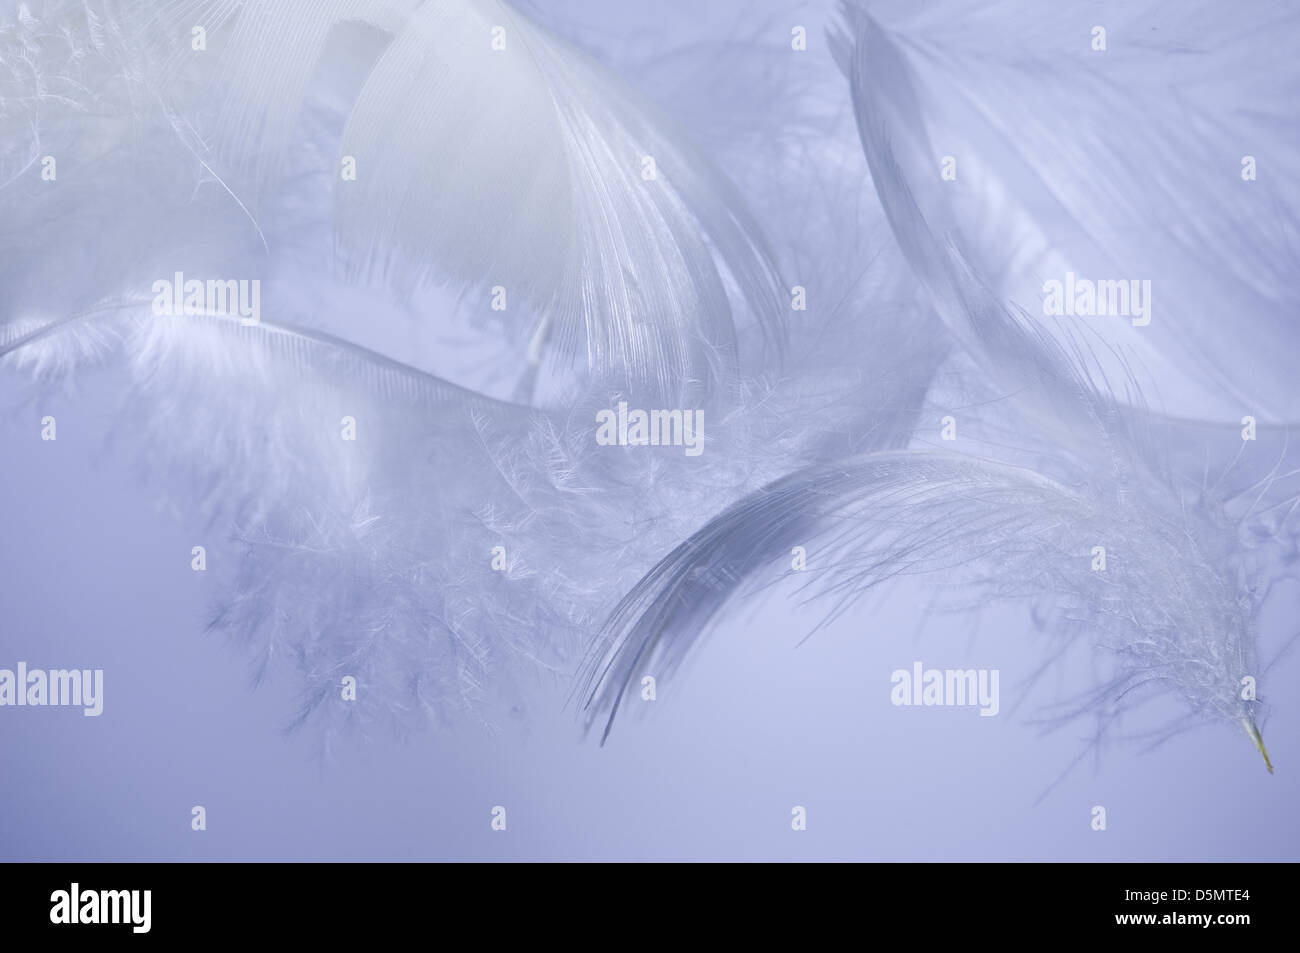 White fluffy feathers flying on blue Stock Photo